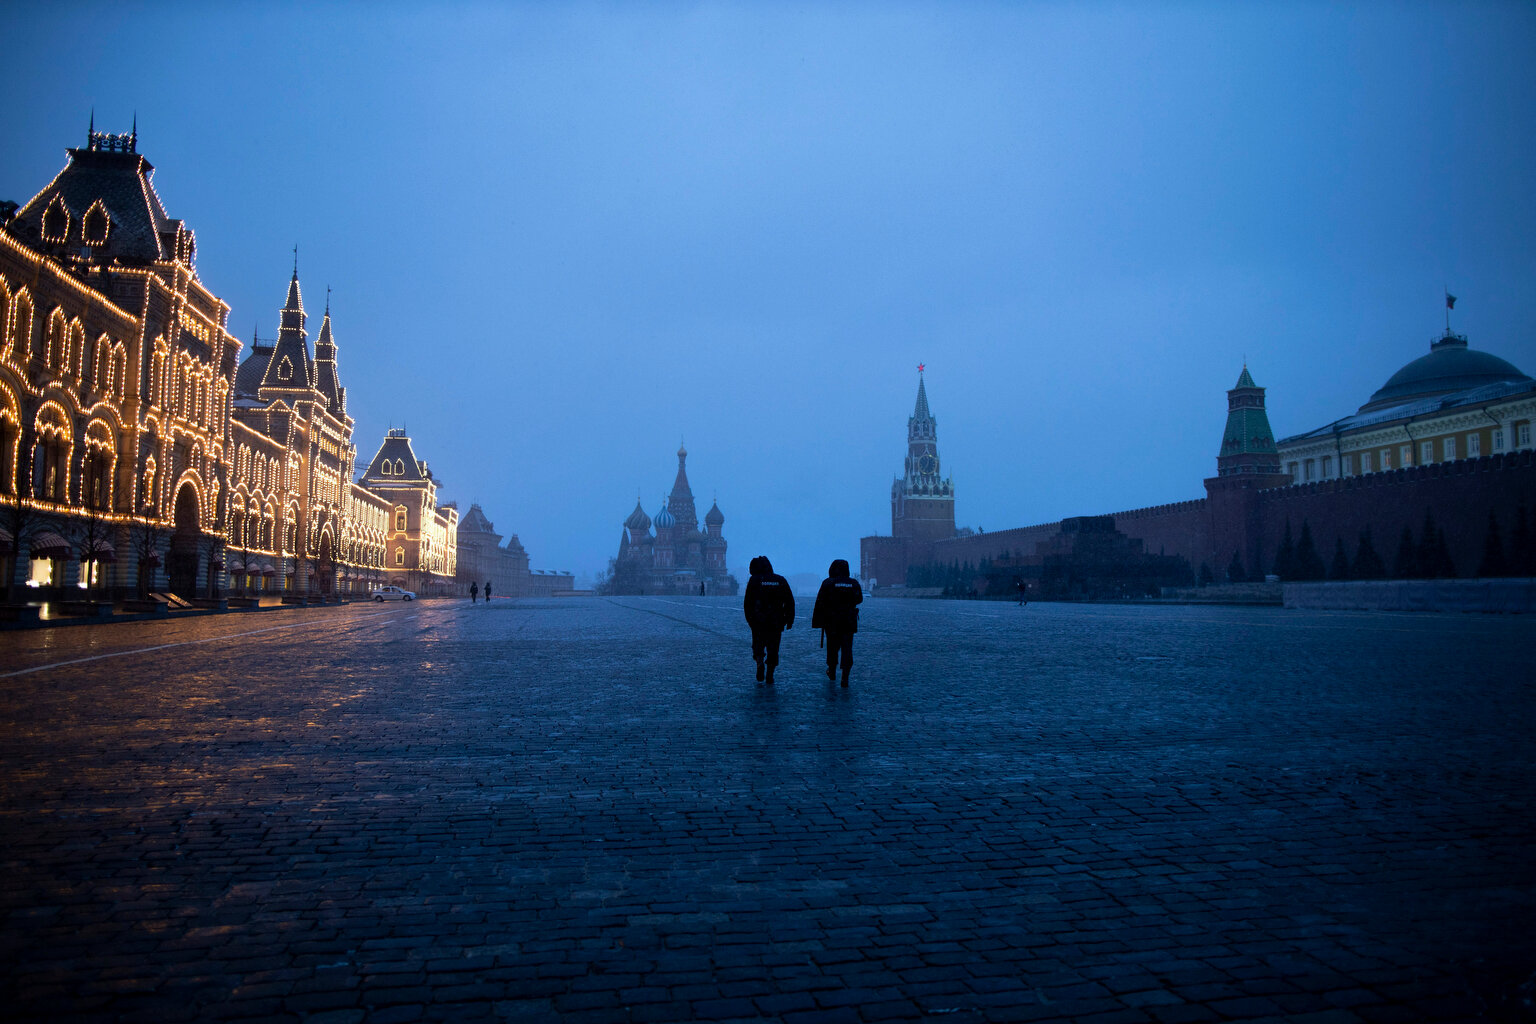  Two police officers patrol an almost empty Red Square, with St. Basil's Cathedral, center, and Spasskaya Tower and the Kremlin Wall, right, at the time when its usually very crowded in Moscow, Russia, Monday, March 30, 2020. (AP Photo/Alexander Zeml